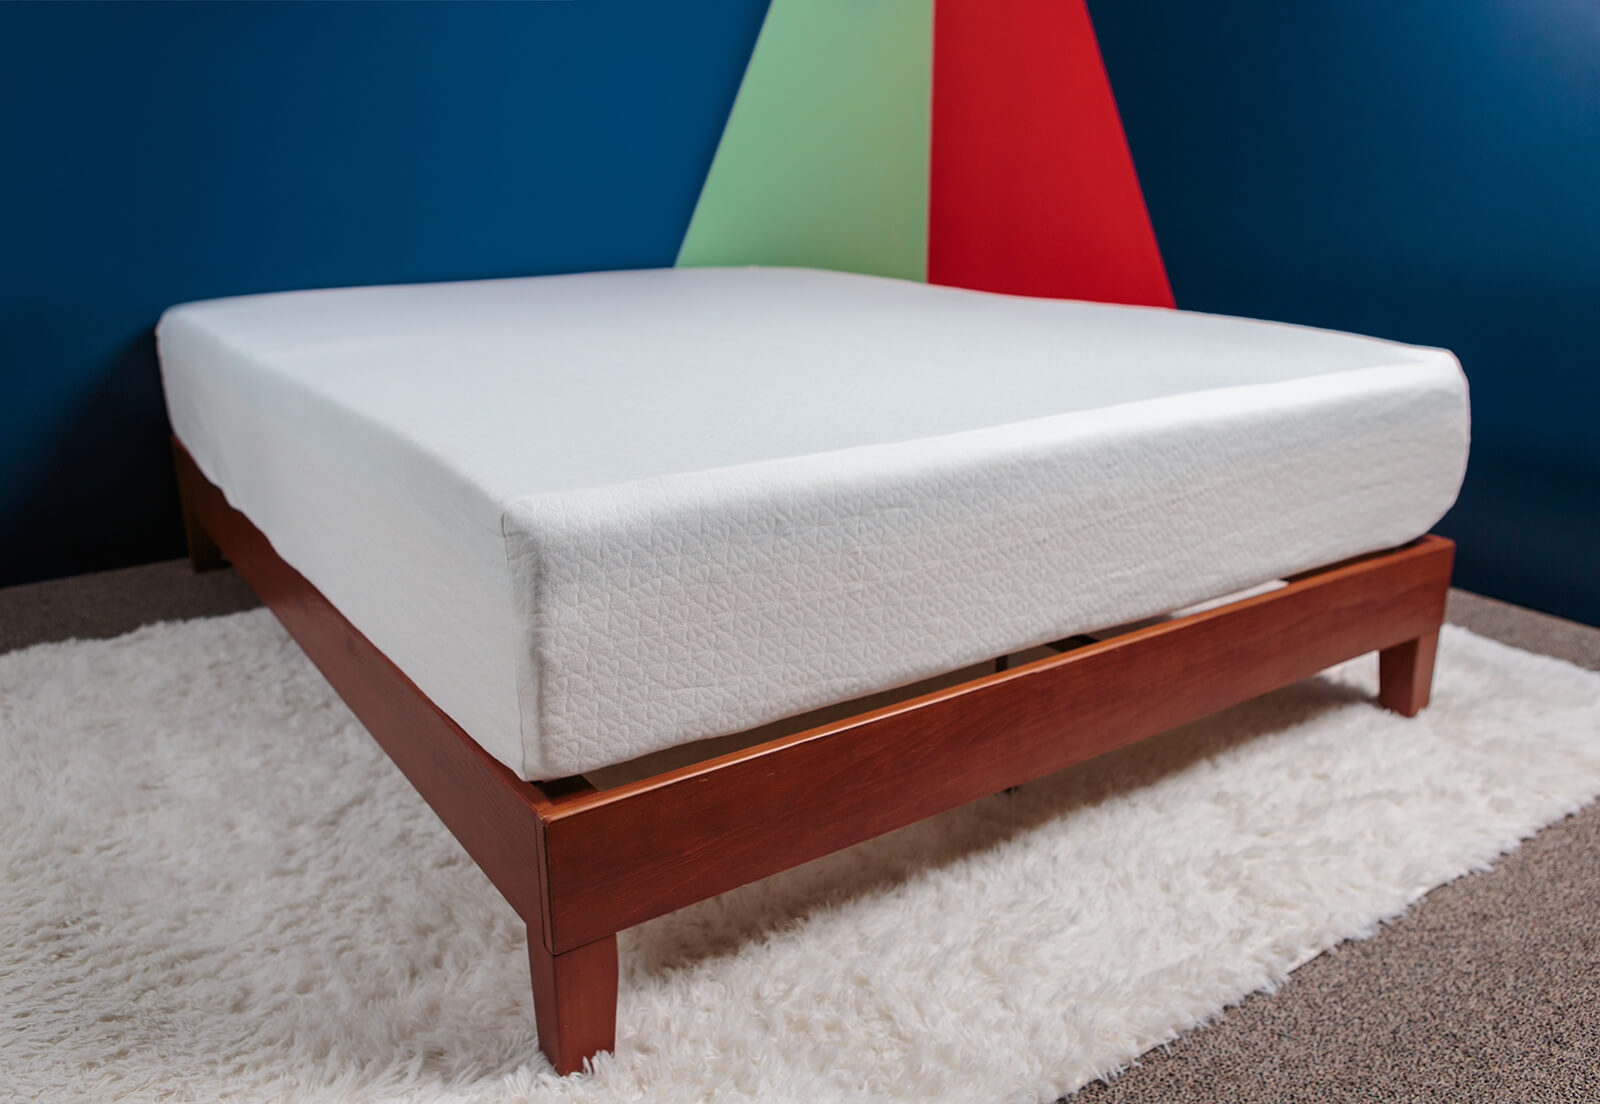 Diagonal view of the Zinus Green Tea mattress on a bed frame